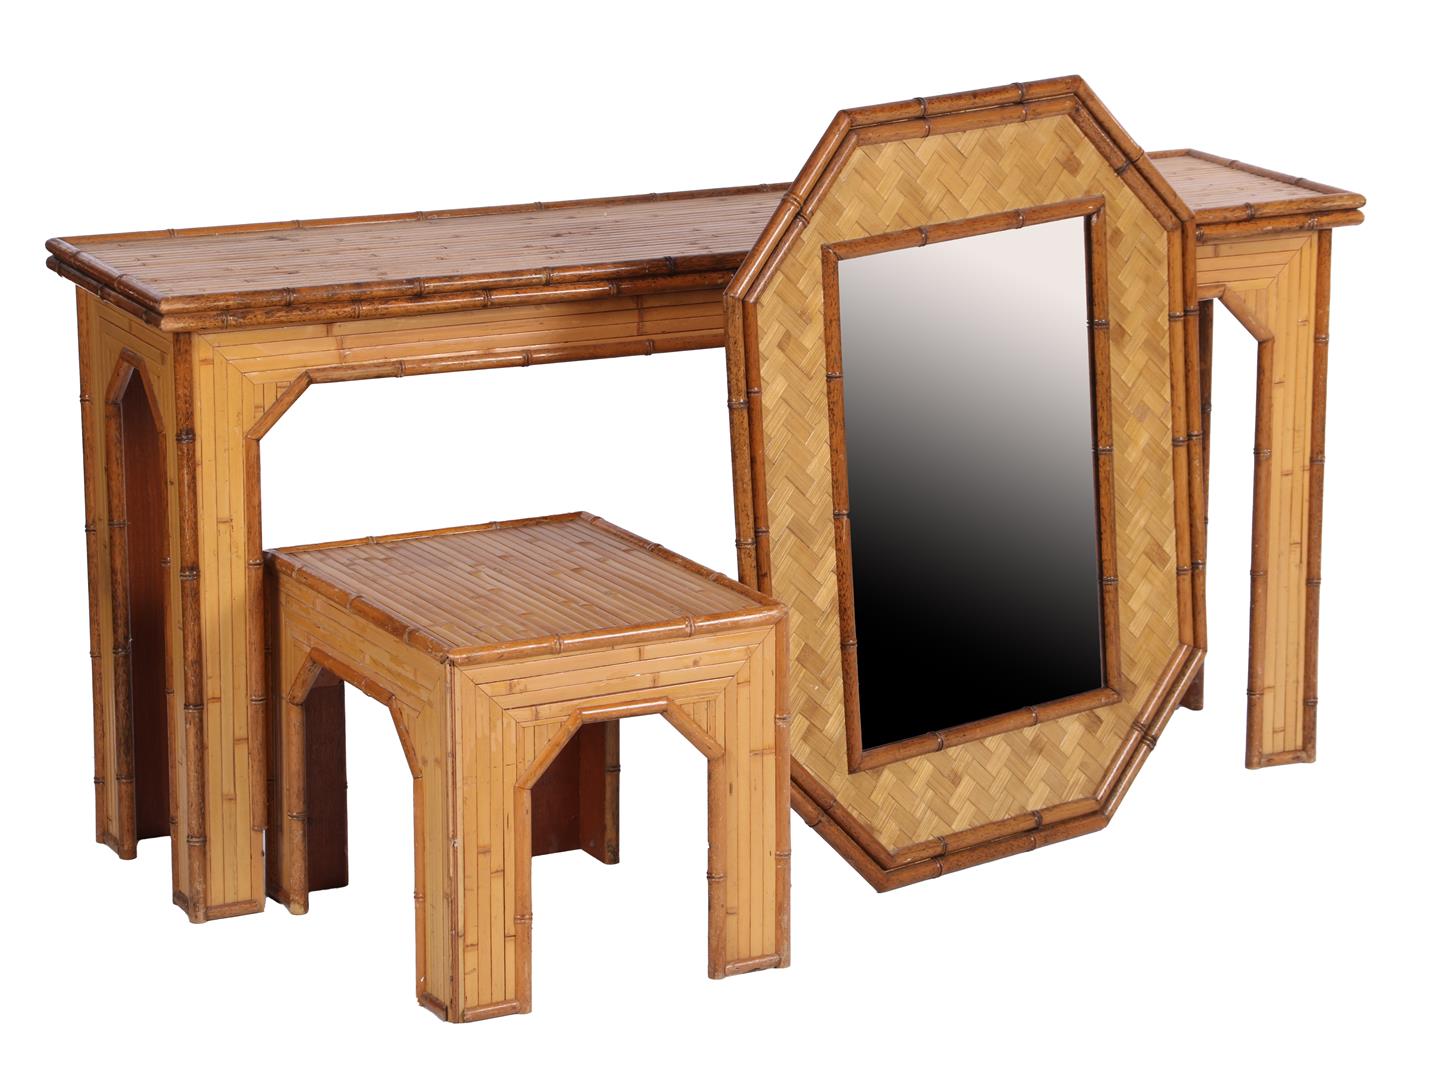 Side tables and mirror